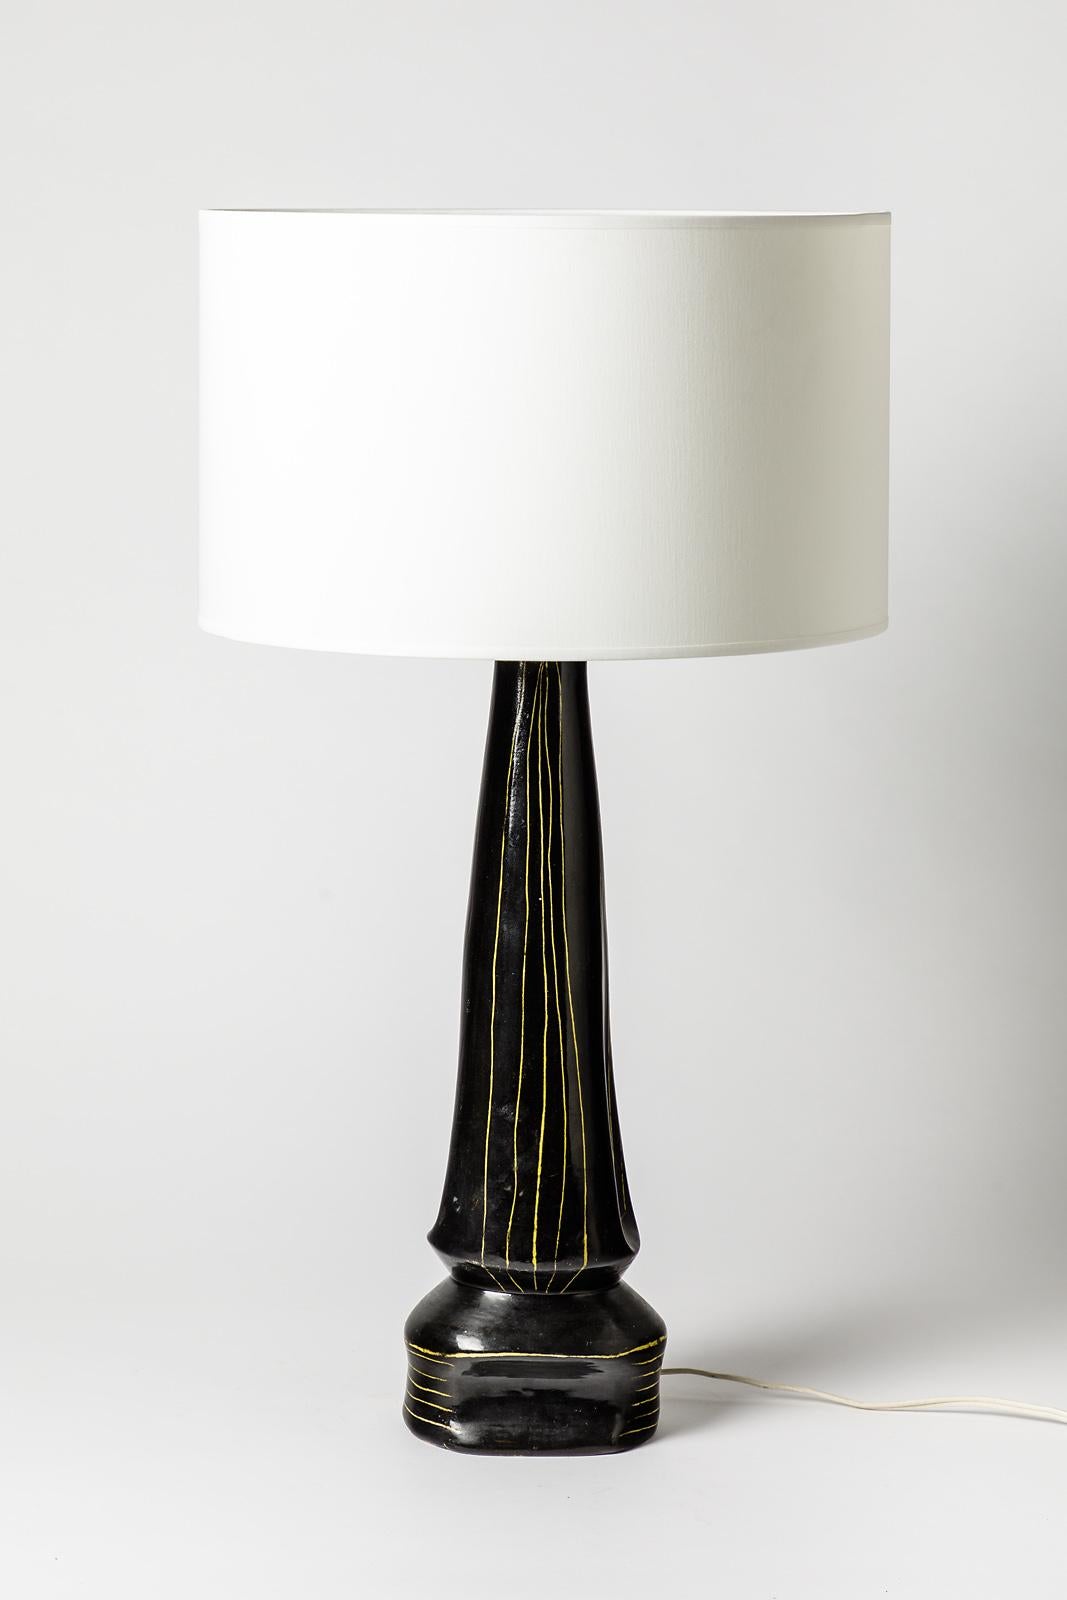 Black and Yellow Mid-20th Century Ceramic Table Lamp Abstract Decoration, 1960 For Sale 2